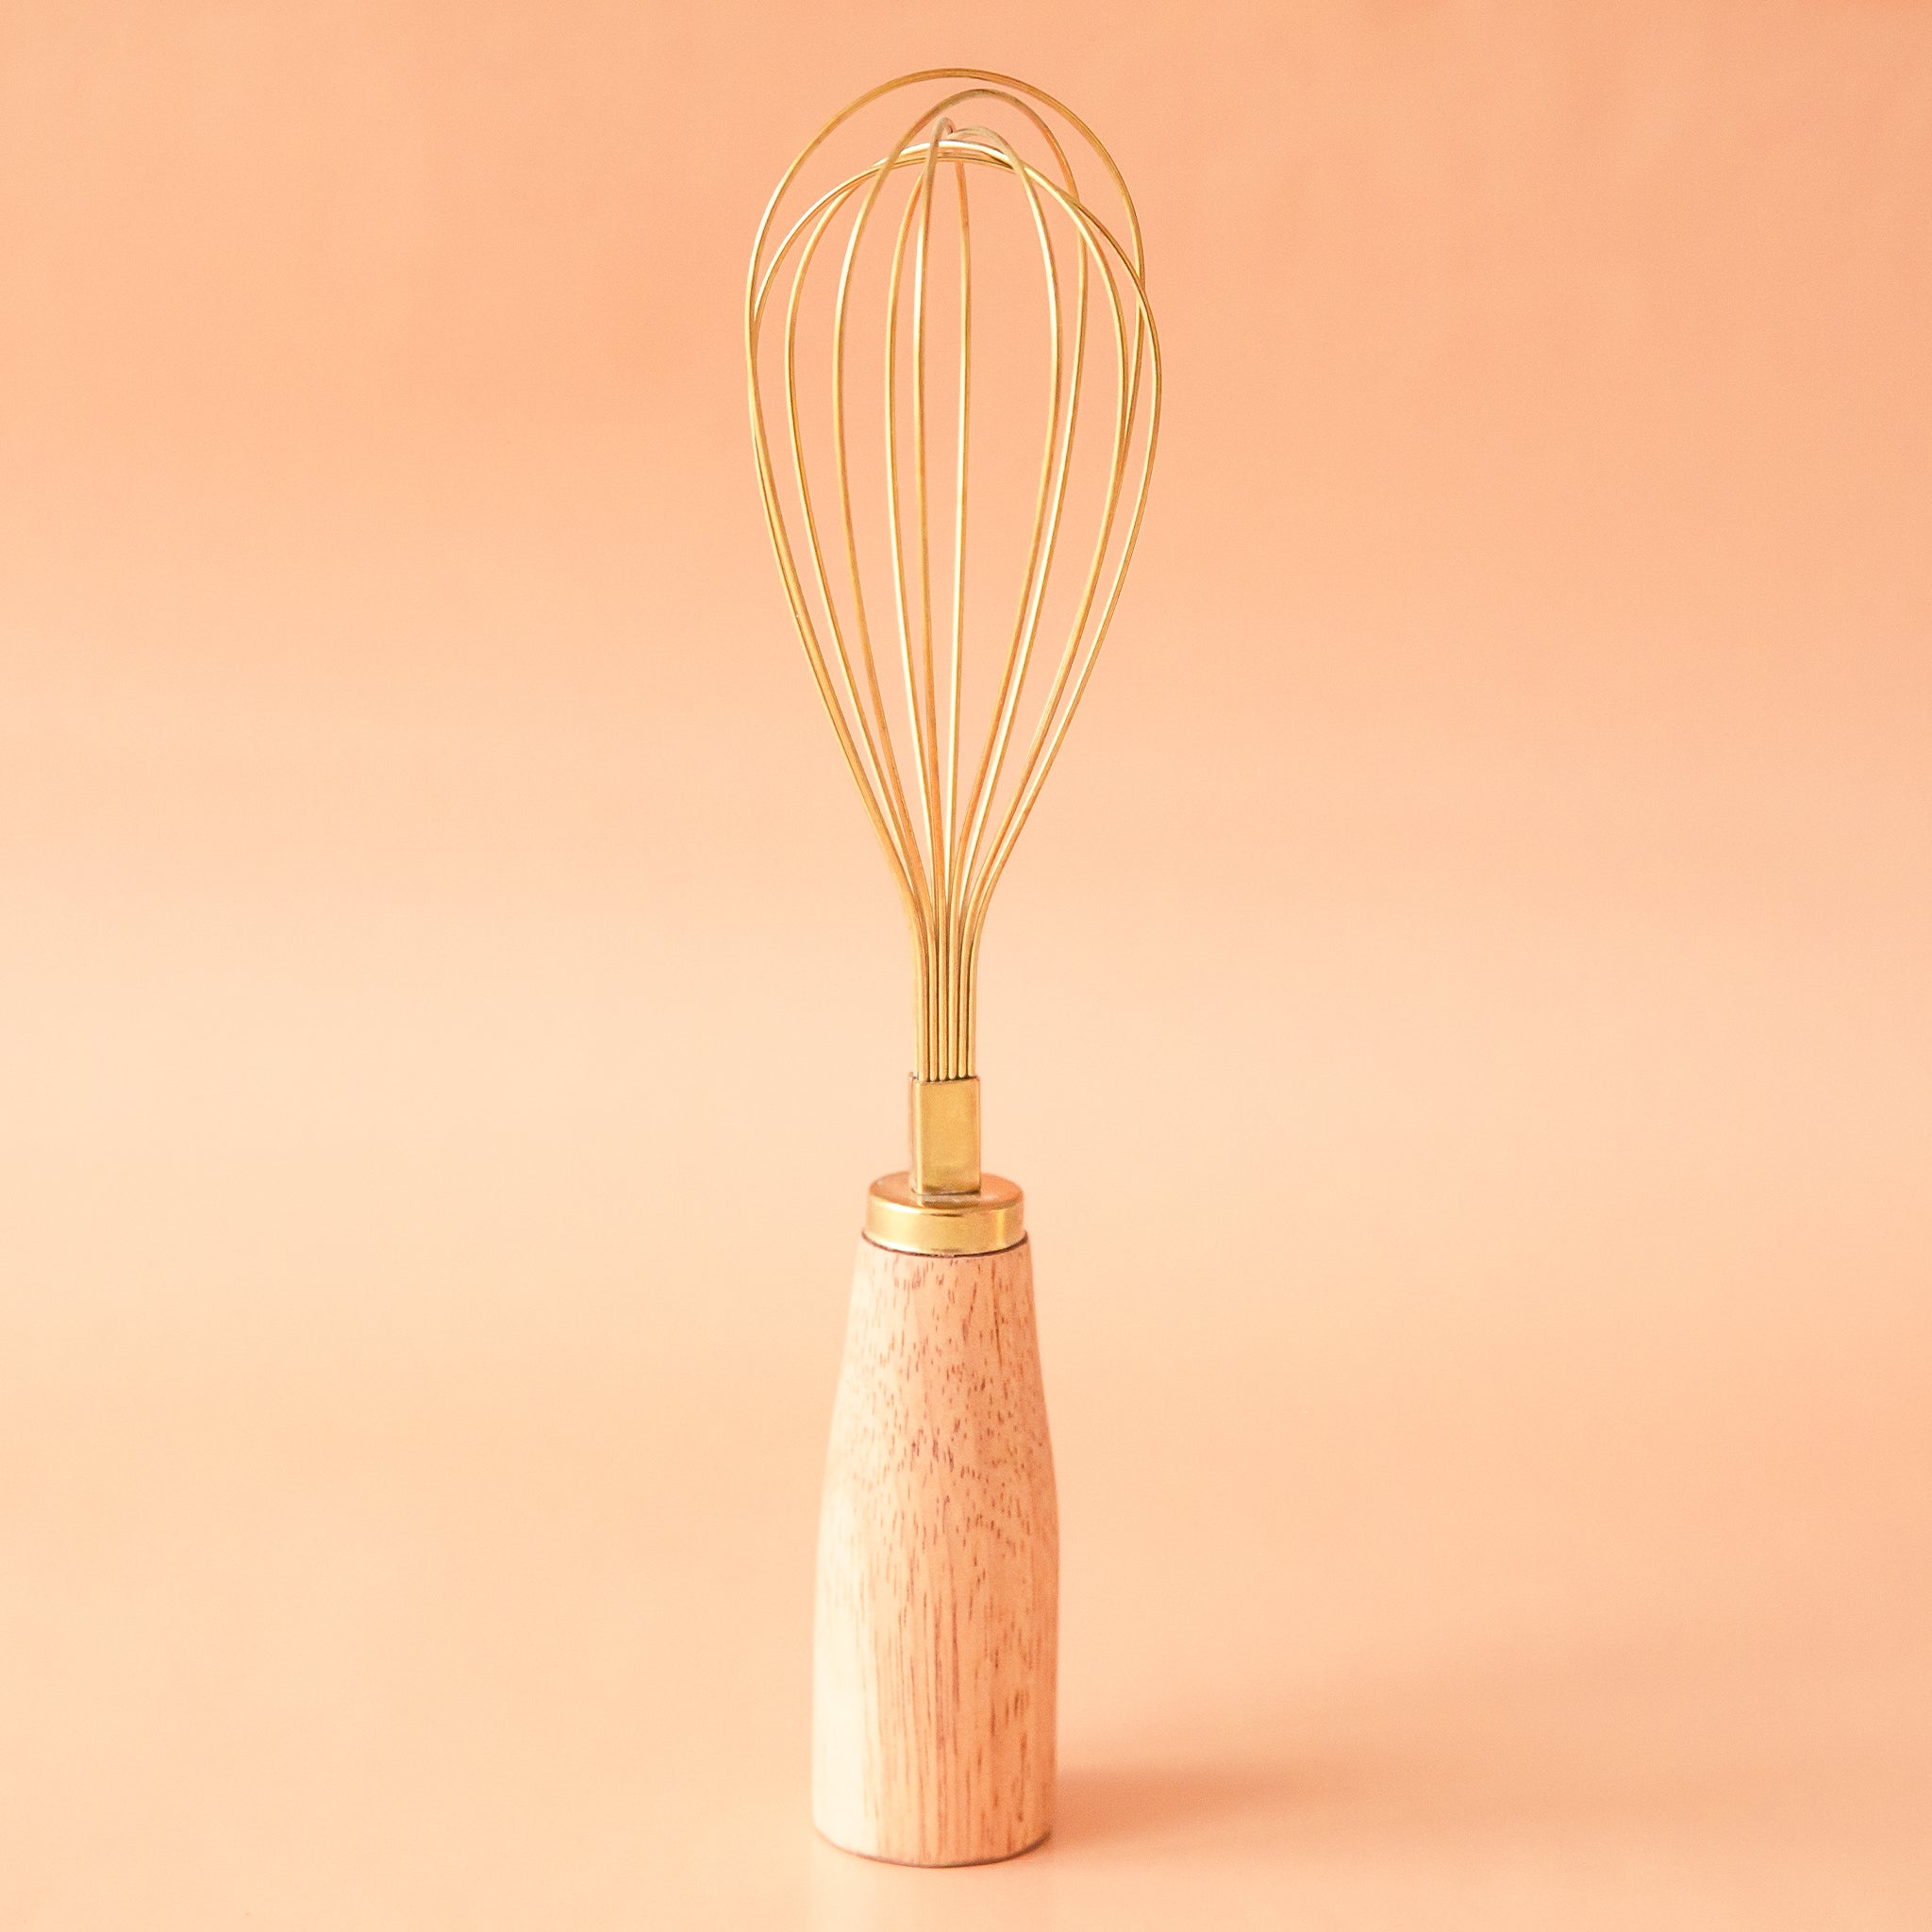 On a peachy background is a gold whisk with a wood handle.